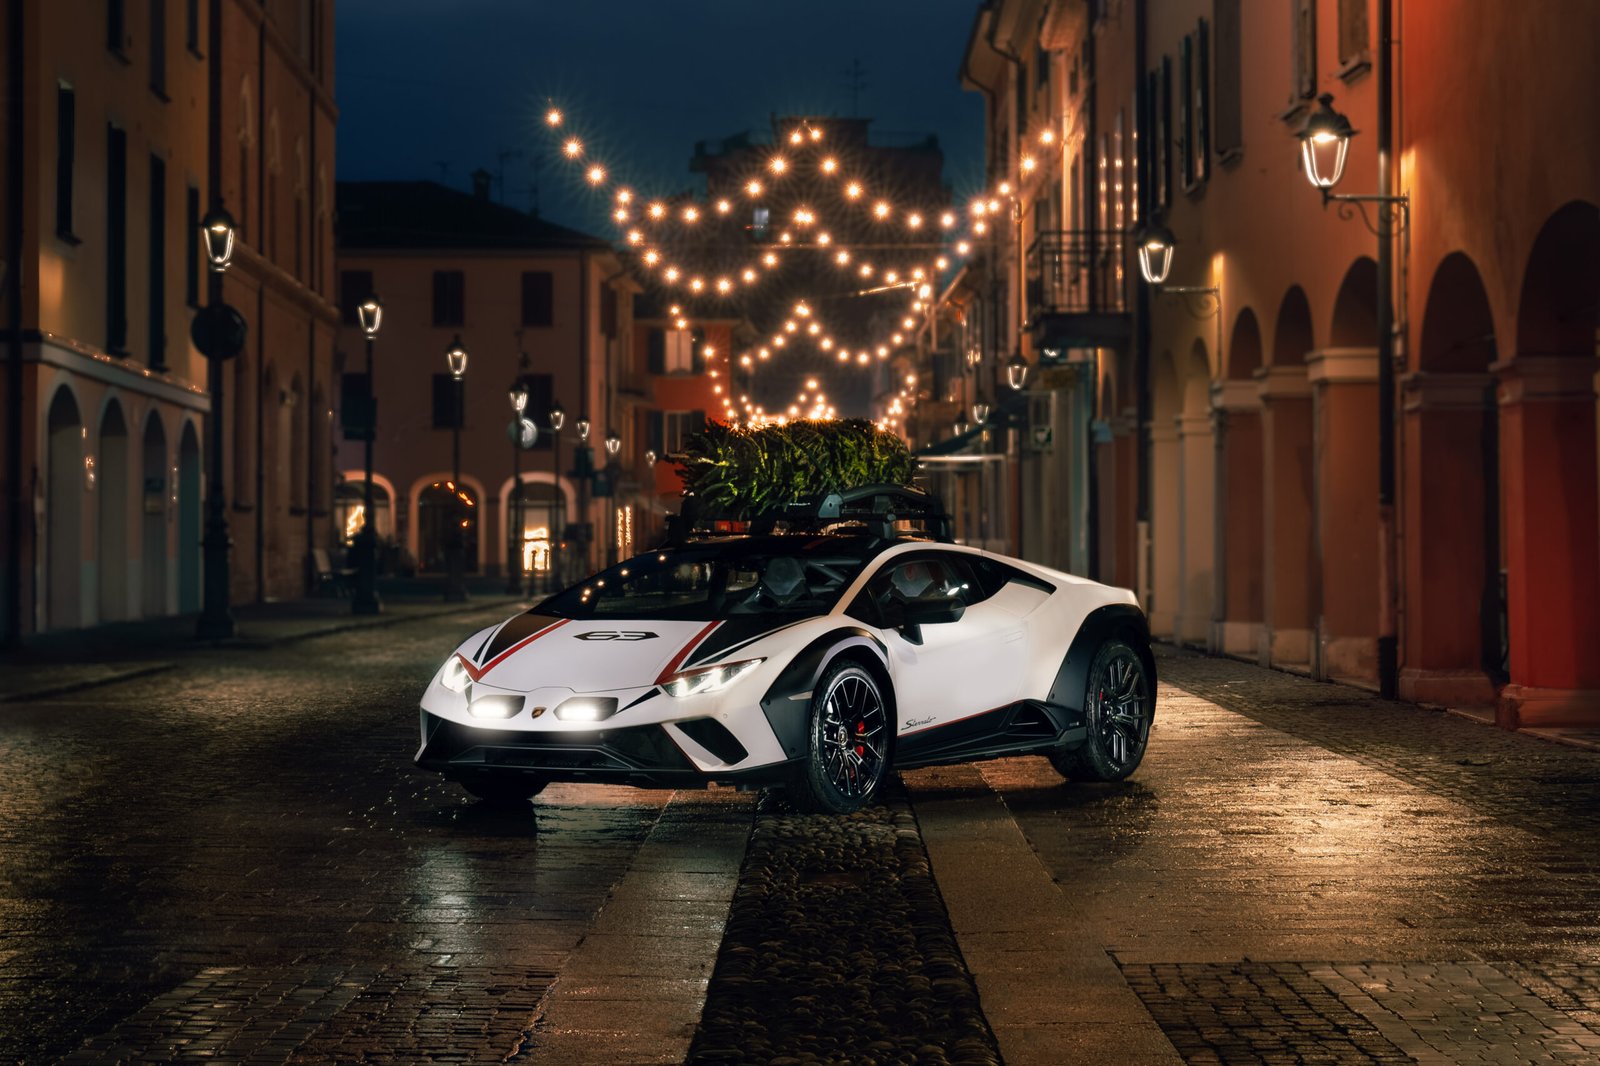 Automobili Lamborghini wishes Happy Holidays with a new video